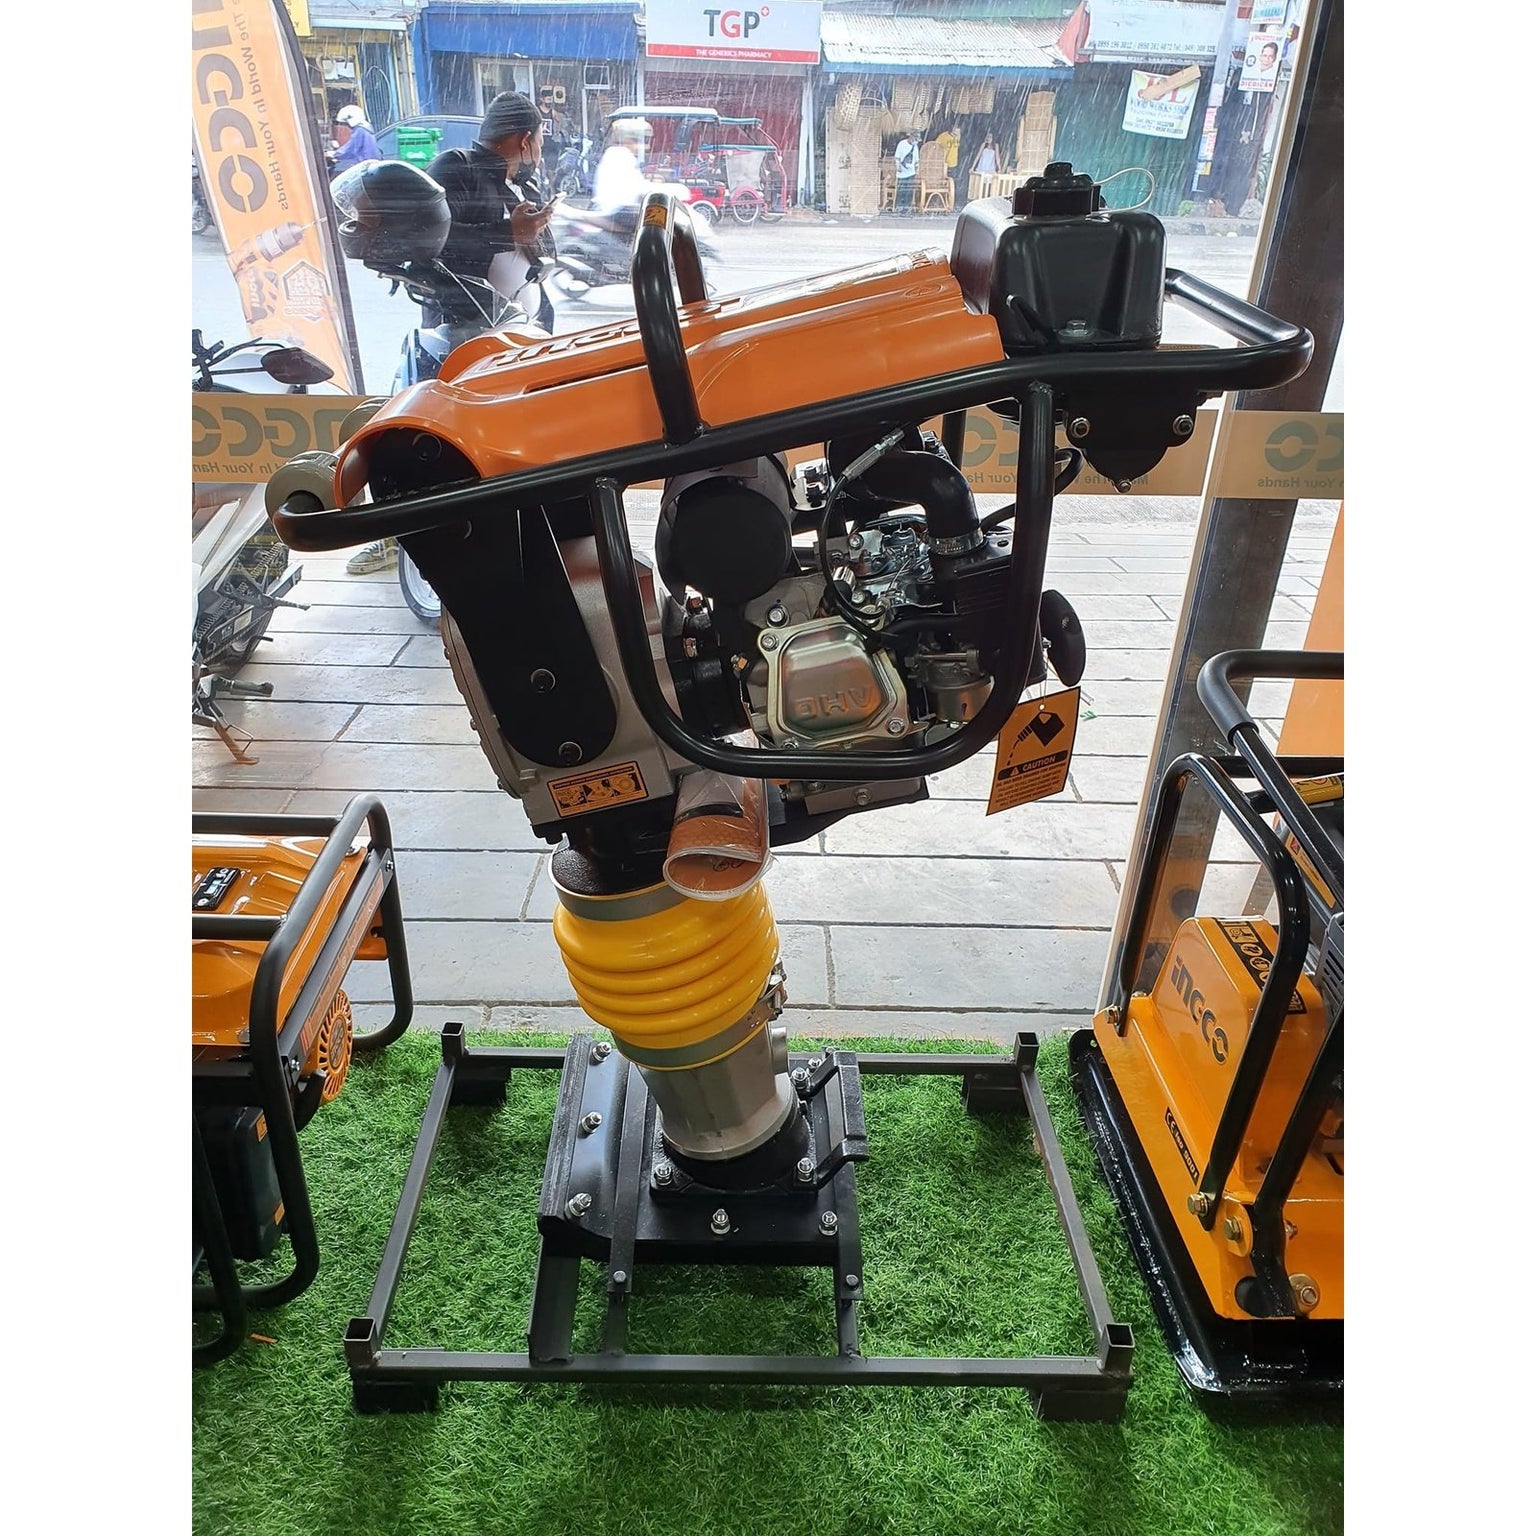 Ingco Gasoline Tamping Rammer 6.5HP - GRT75-2 | Supply Master | Accra, Ghana Construction Equipment Buy Tools hardware Building materials